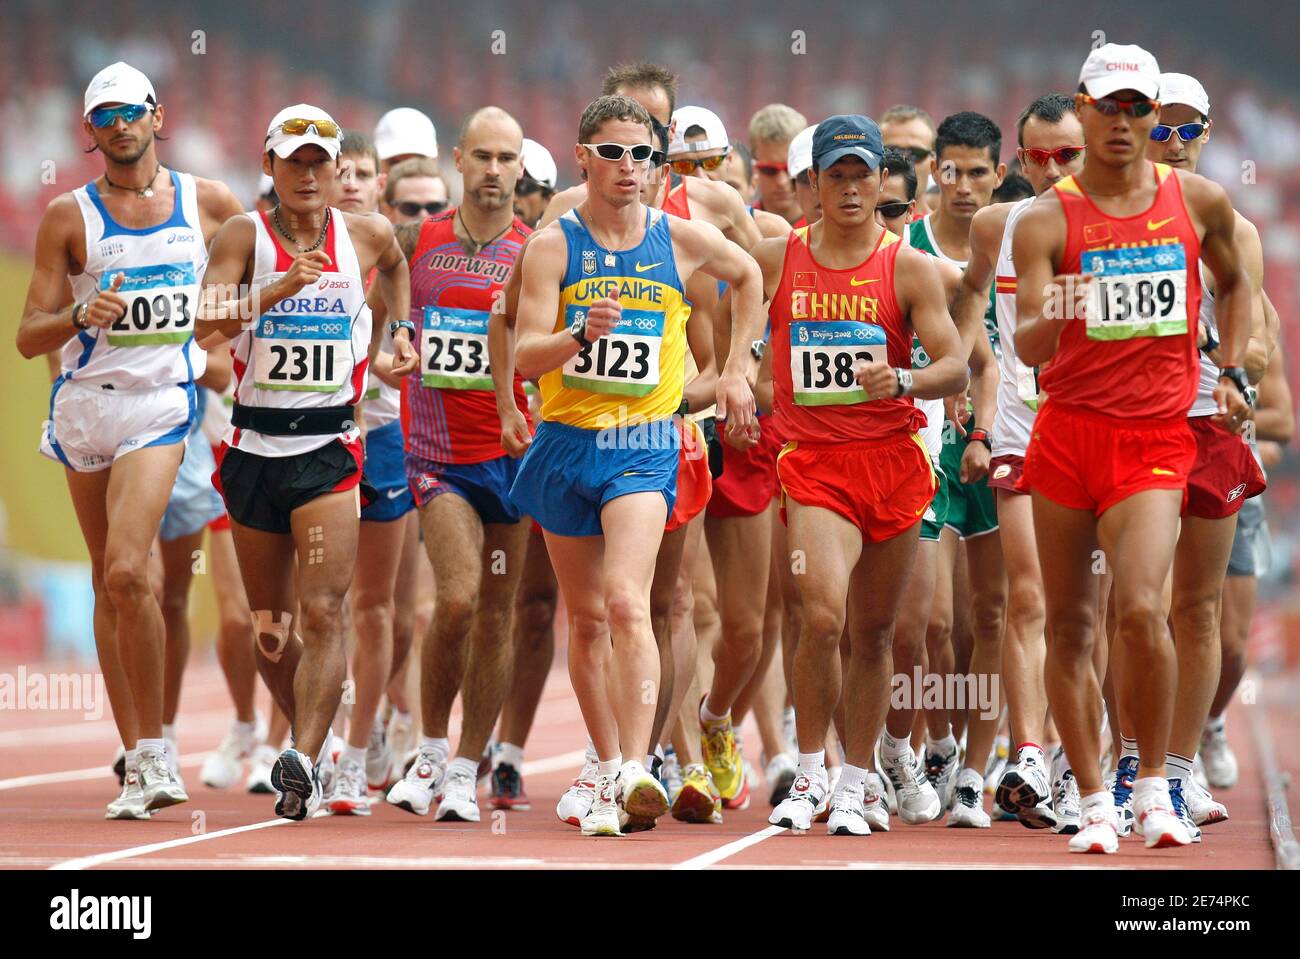 Competitors walk down the main straightaway during a lap of the National  Stadium at the start of the men's 50 kilometer race walk at the Beijing  2008 Olympic Games August 22, 2008.